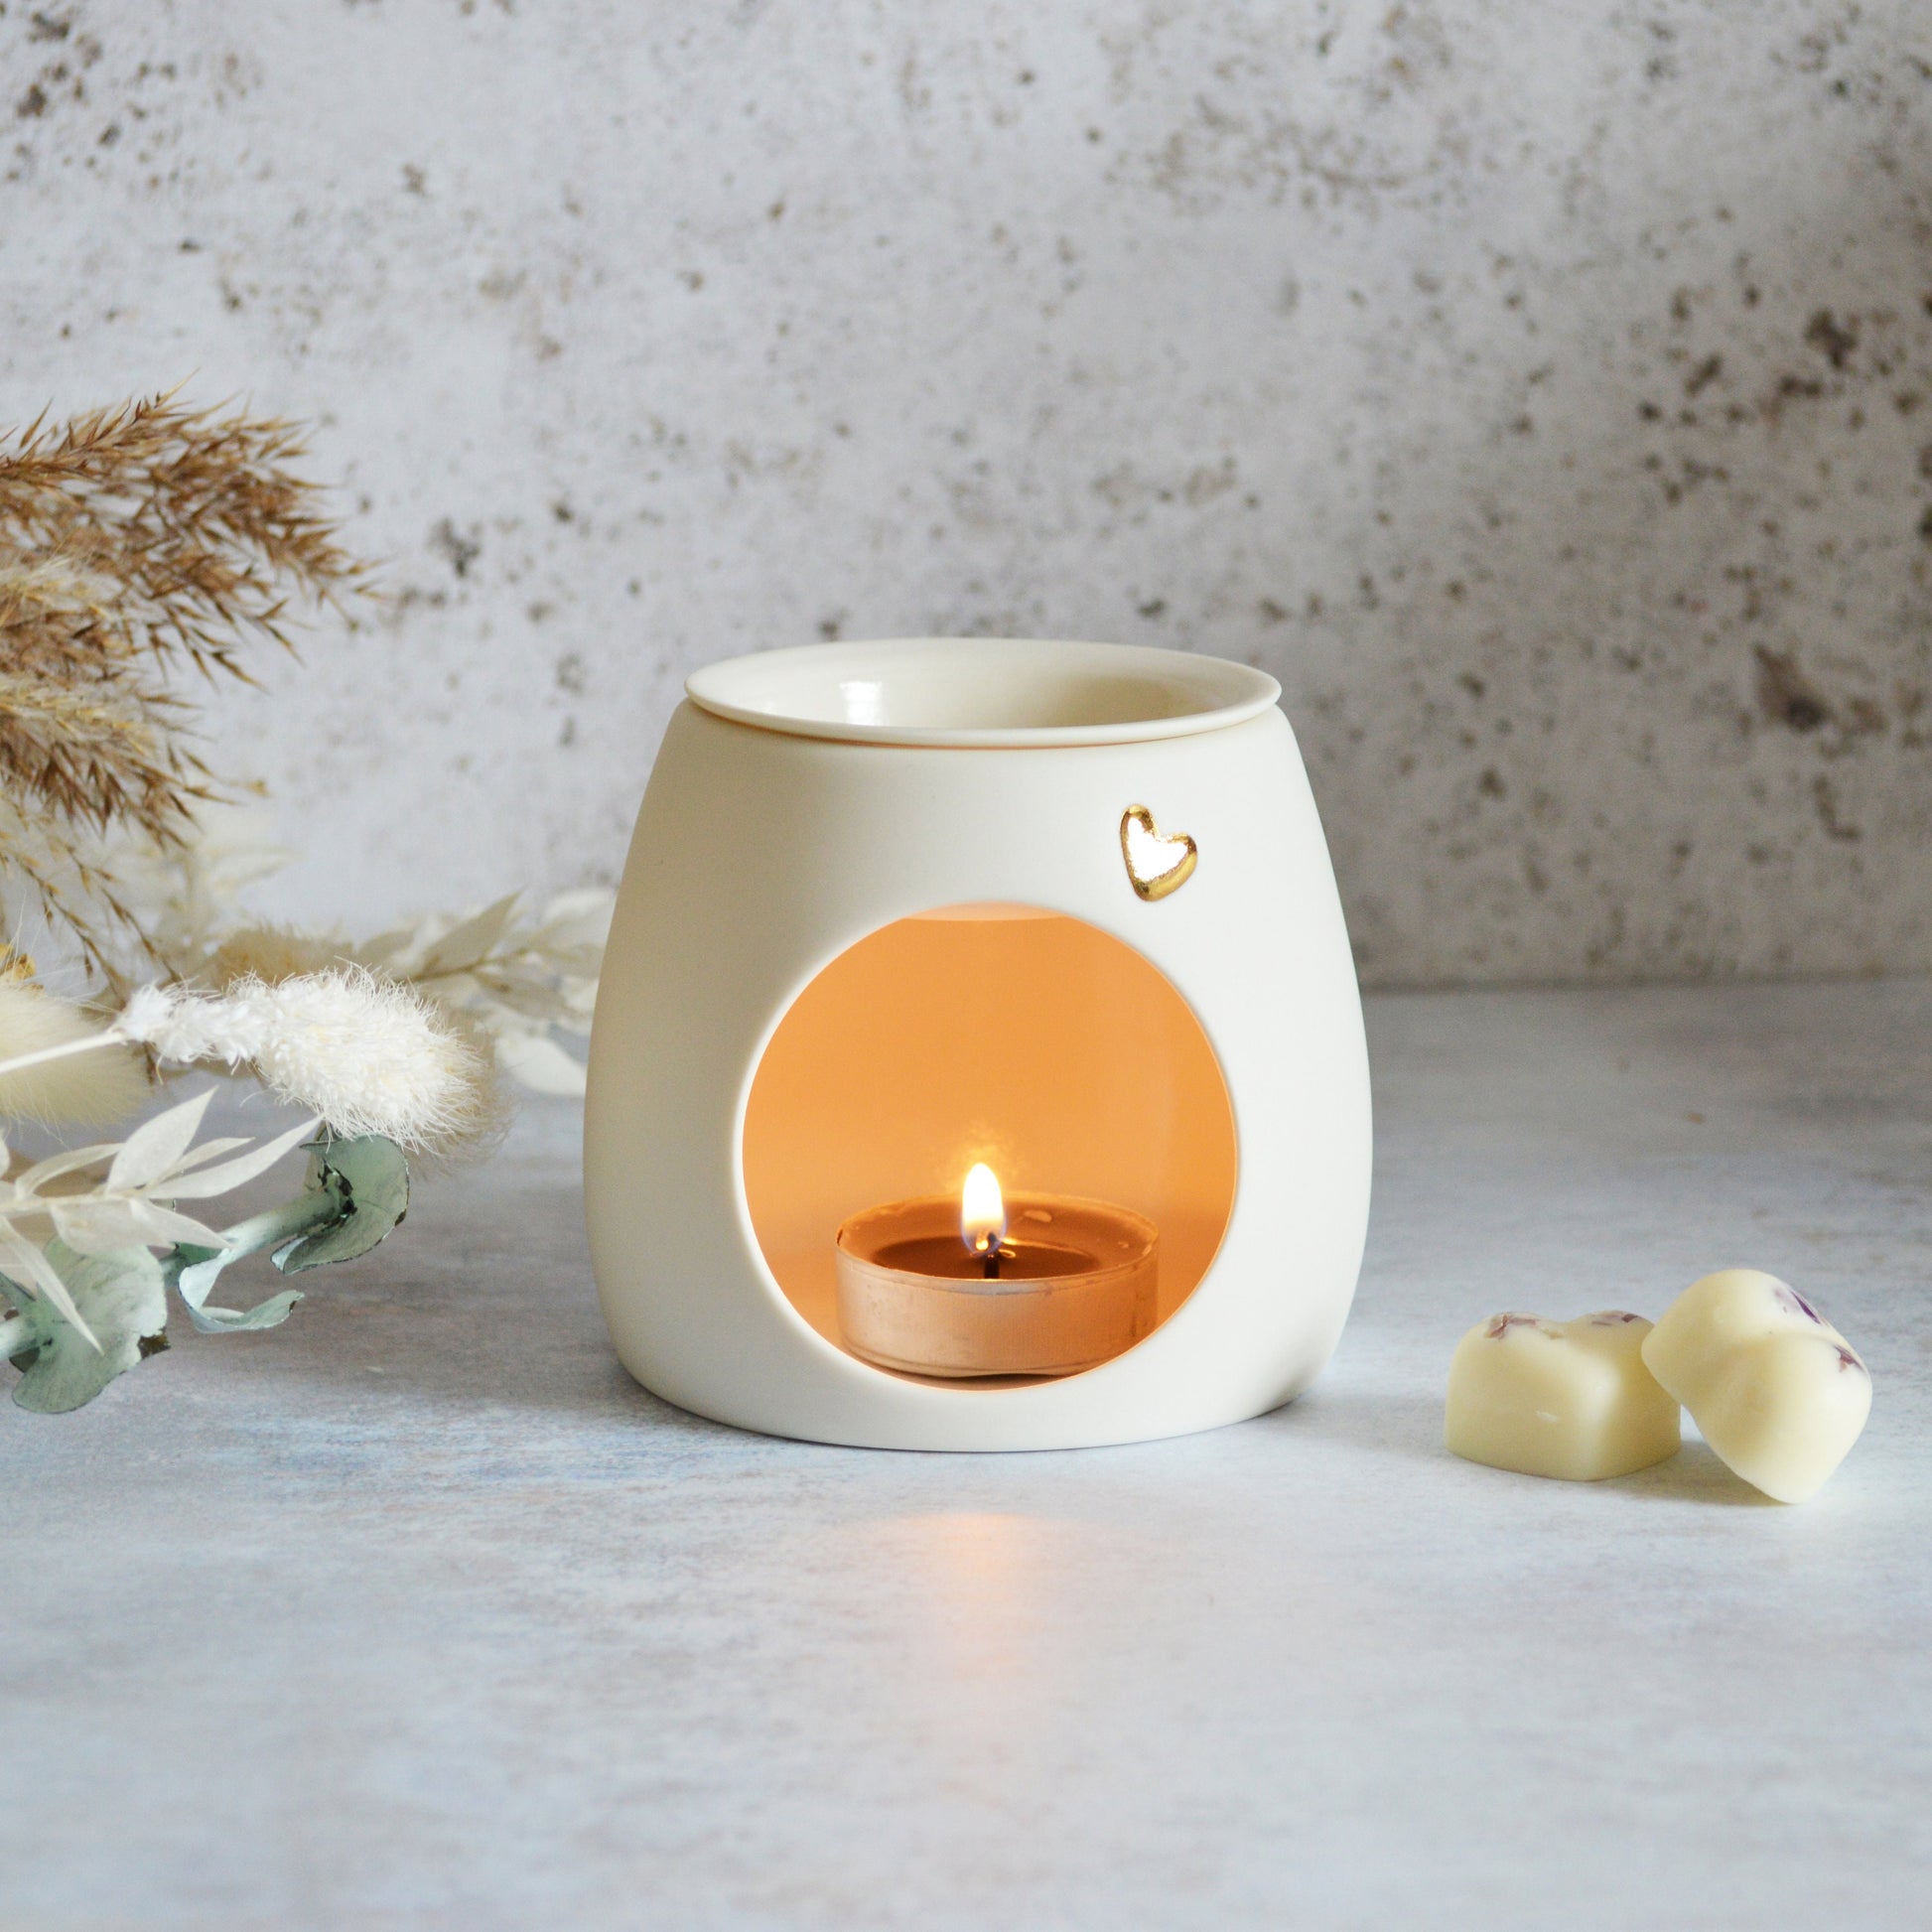 Ceramic Wax Melt / Oil Burner, Handmade and Available in Grey